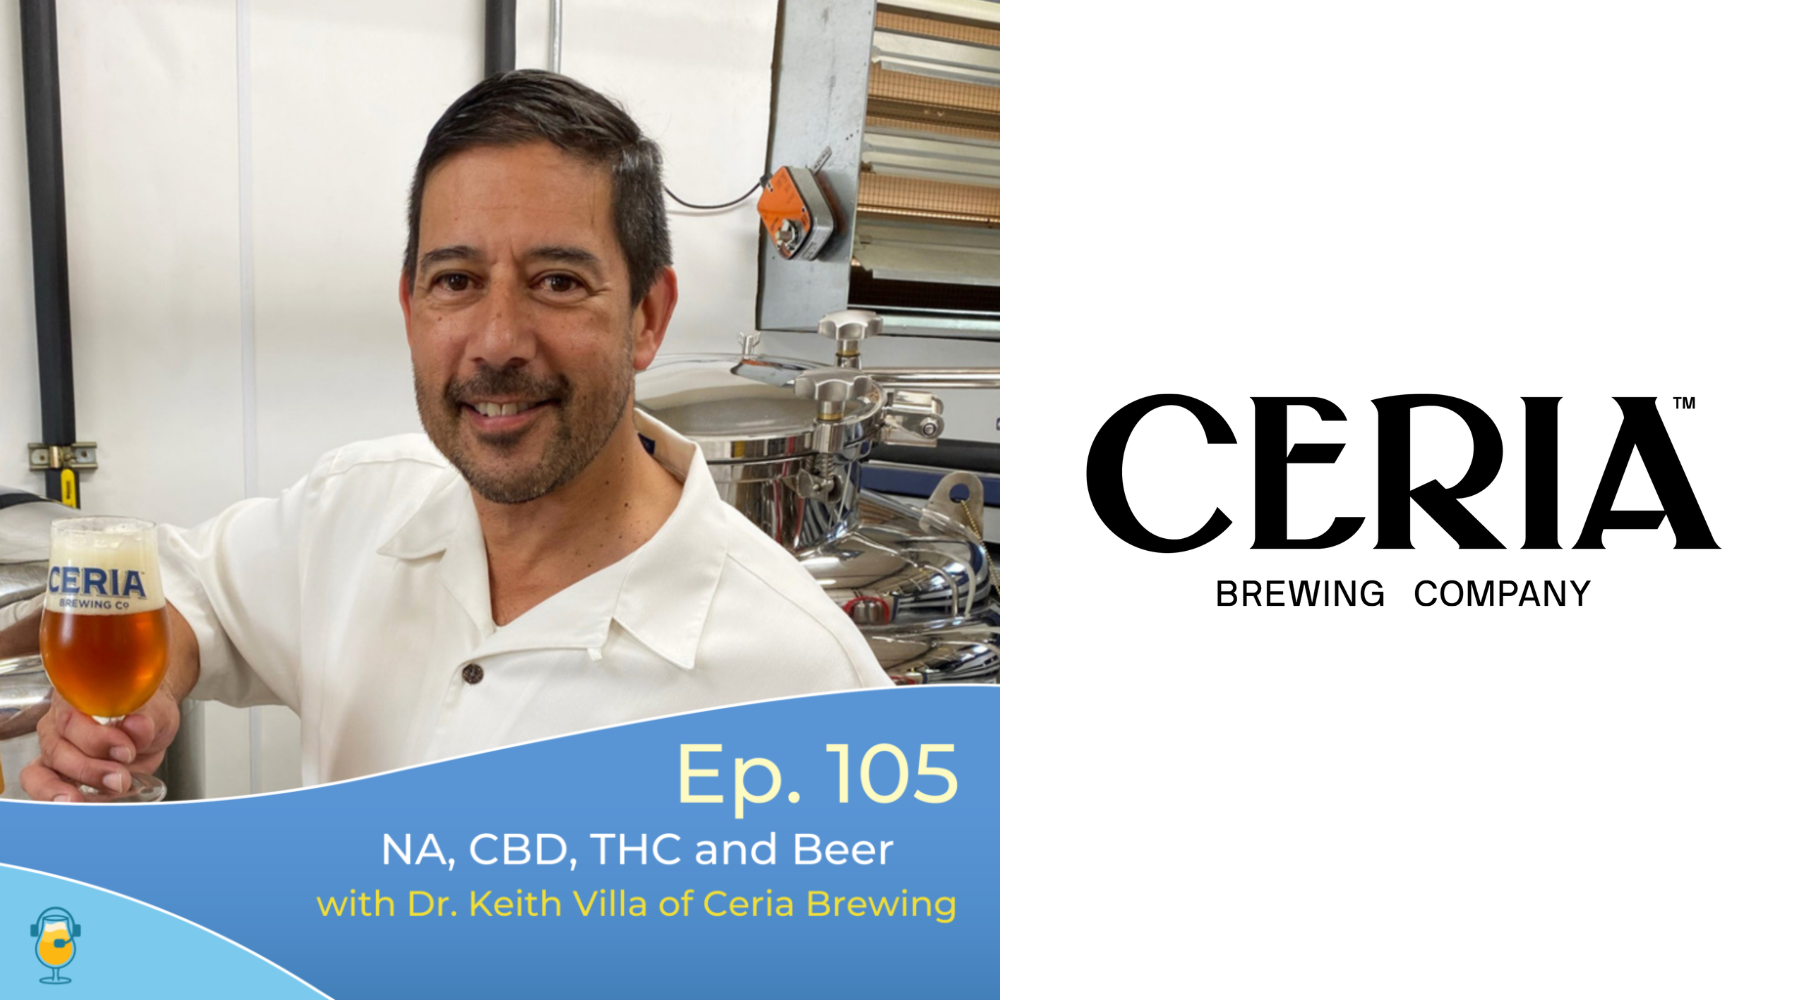 Good Beer Matters: The New World of Non-Alcoholic, Cannabis Beer, with Dr. Keith Villa of Ceria Brewing